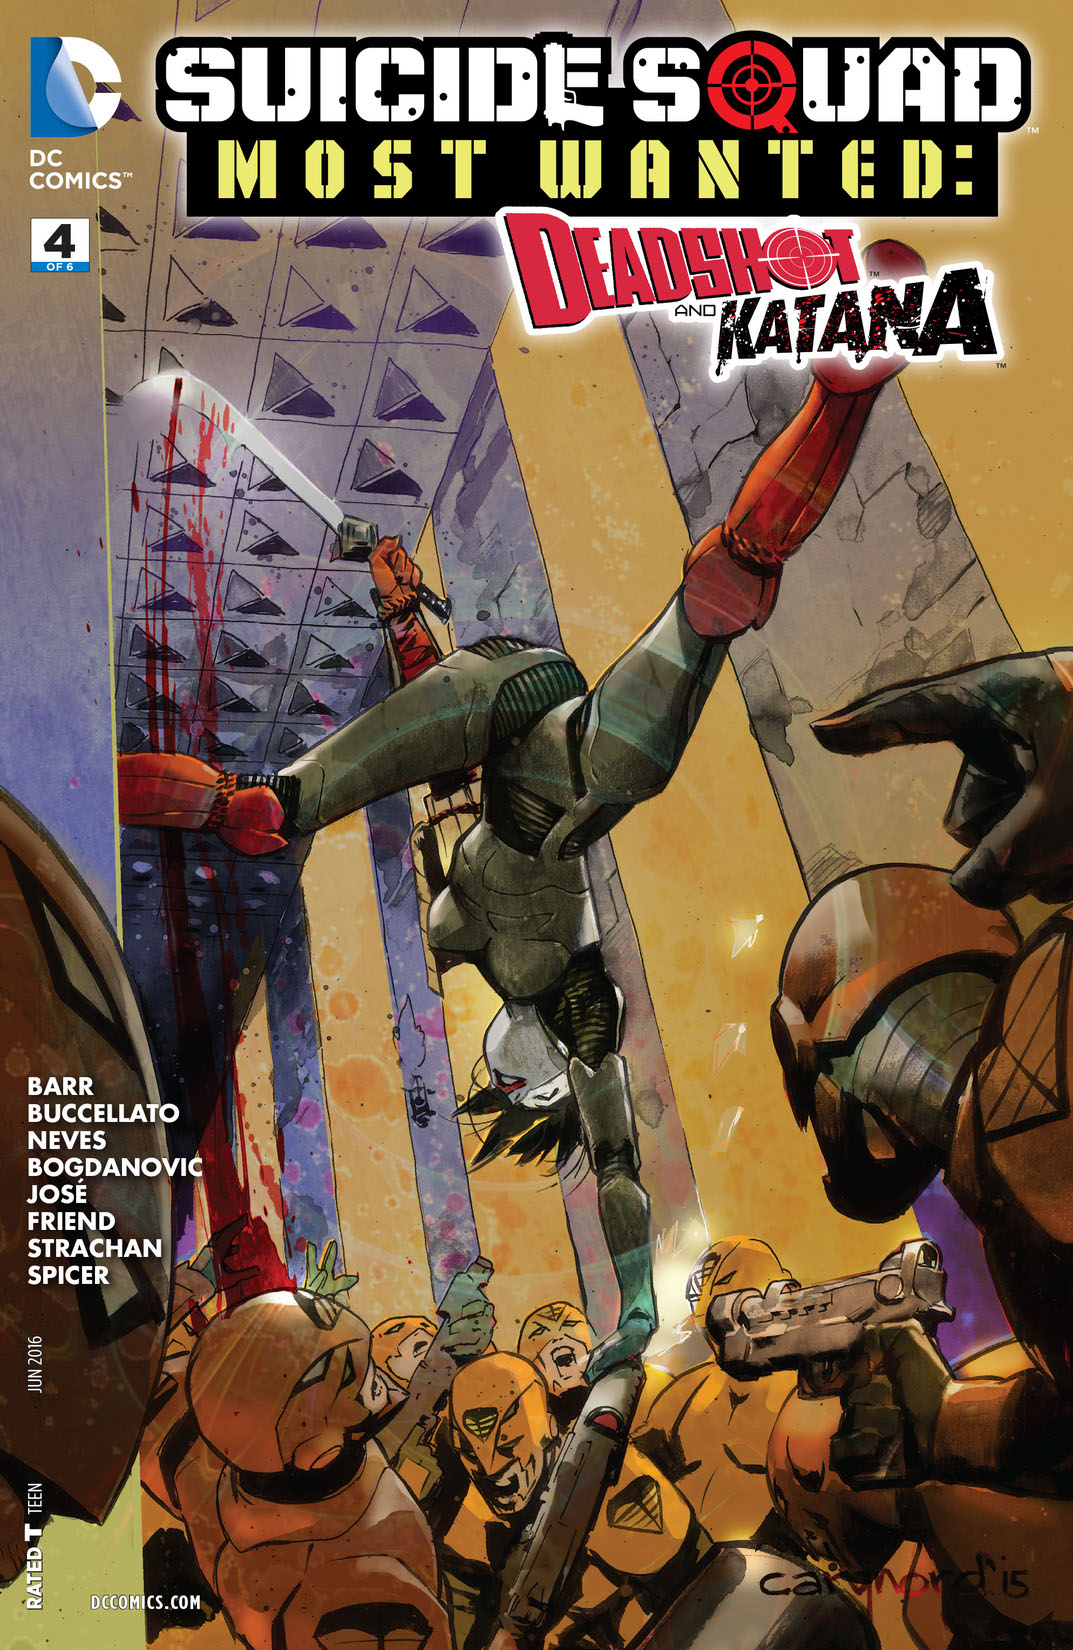 Suicide Squad Most Wanted: Deadshot and Katana #4 preview images